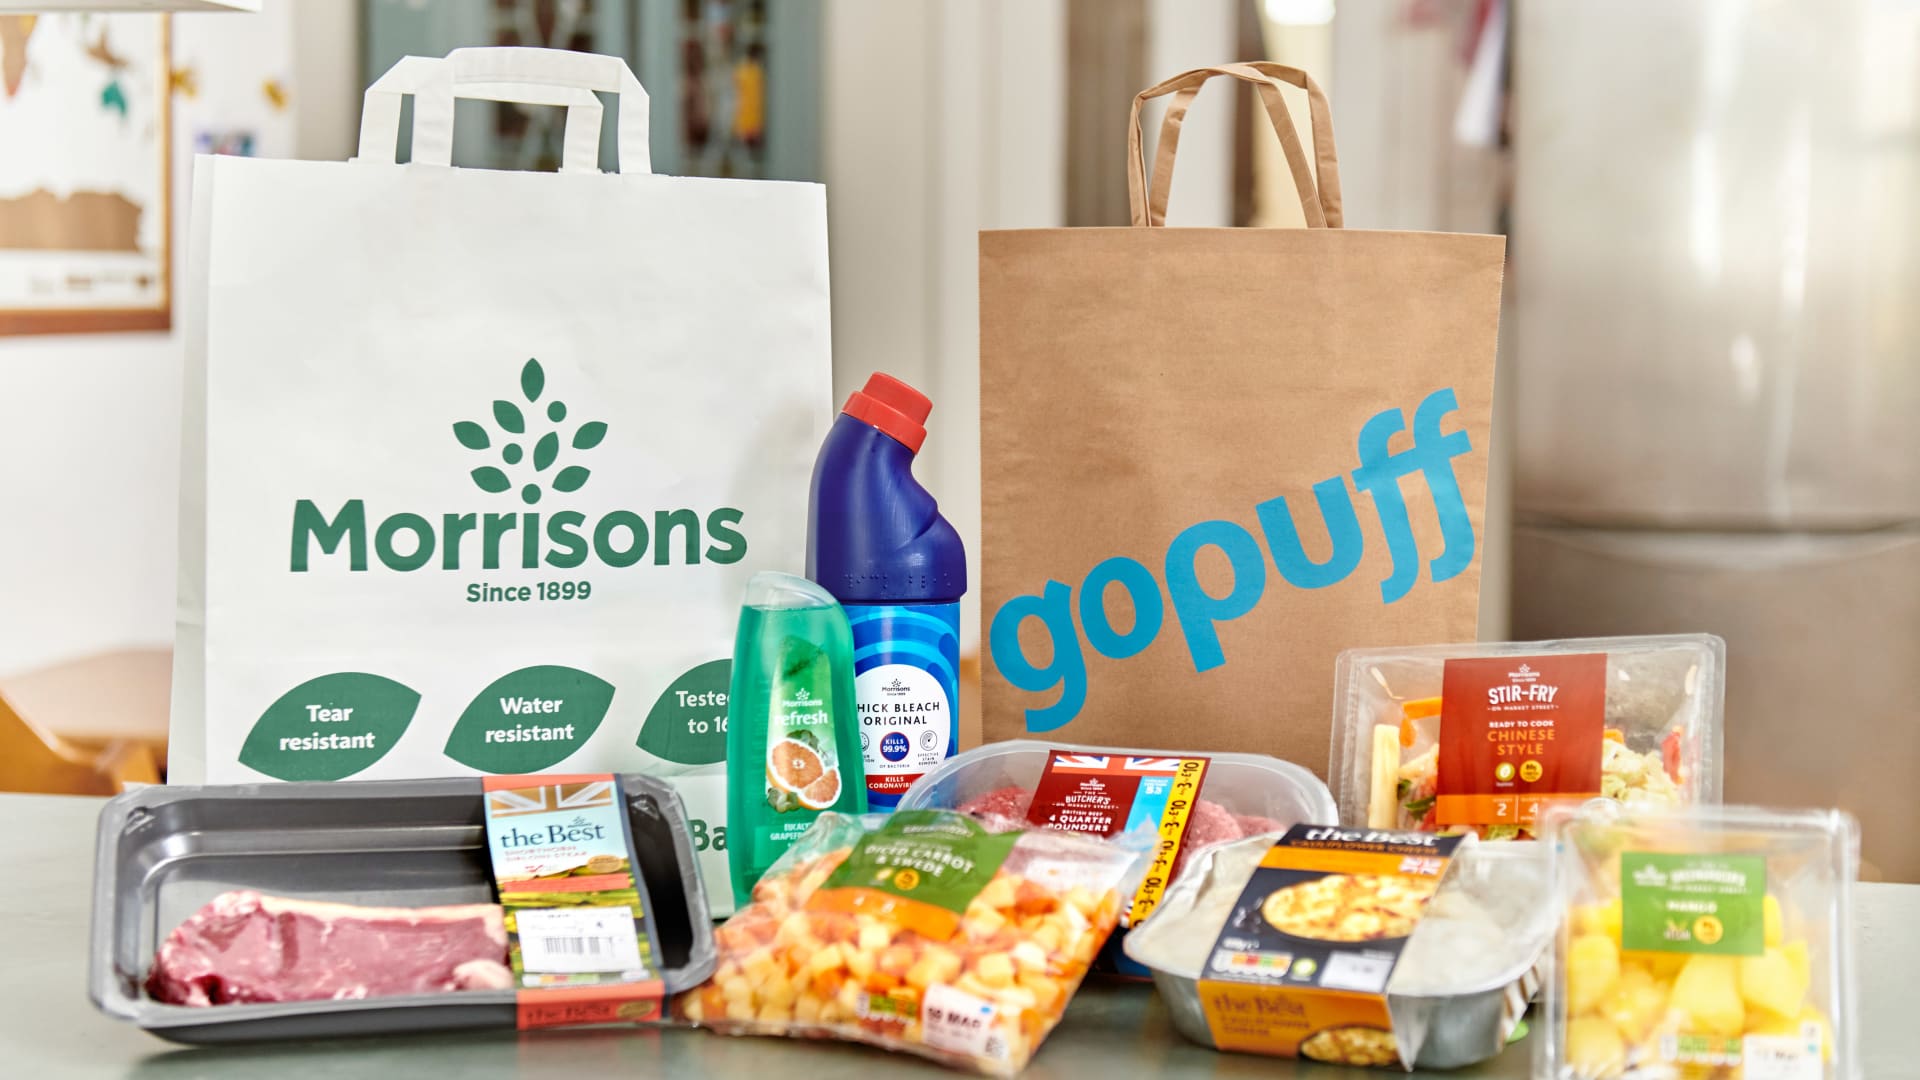 Grocery start-up Gopuff partners with UK retail giant Morrisons for speedy deliveries